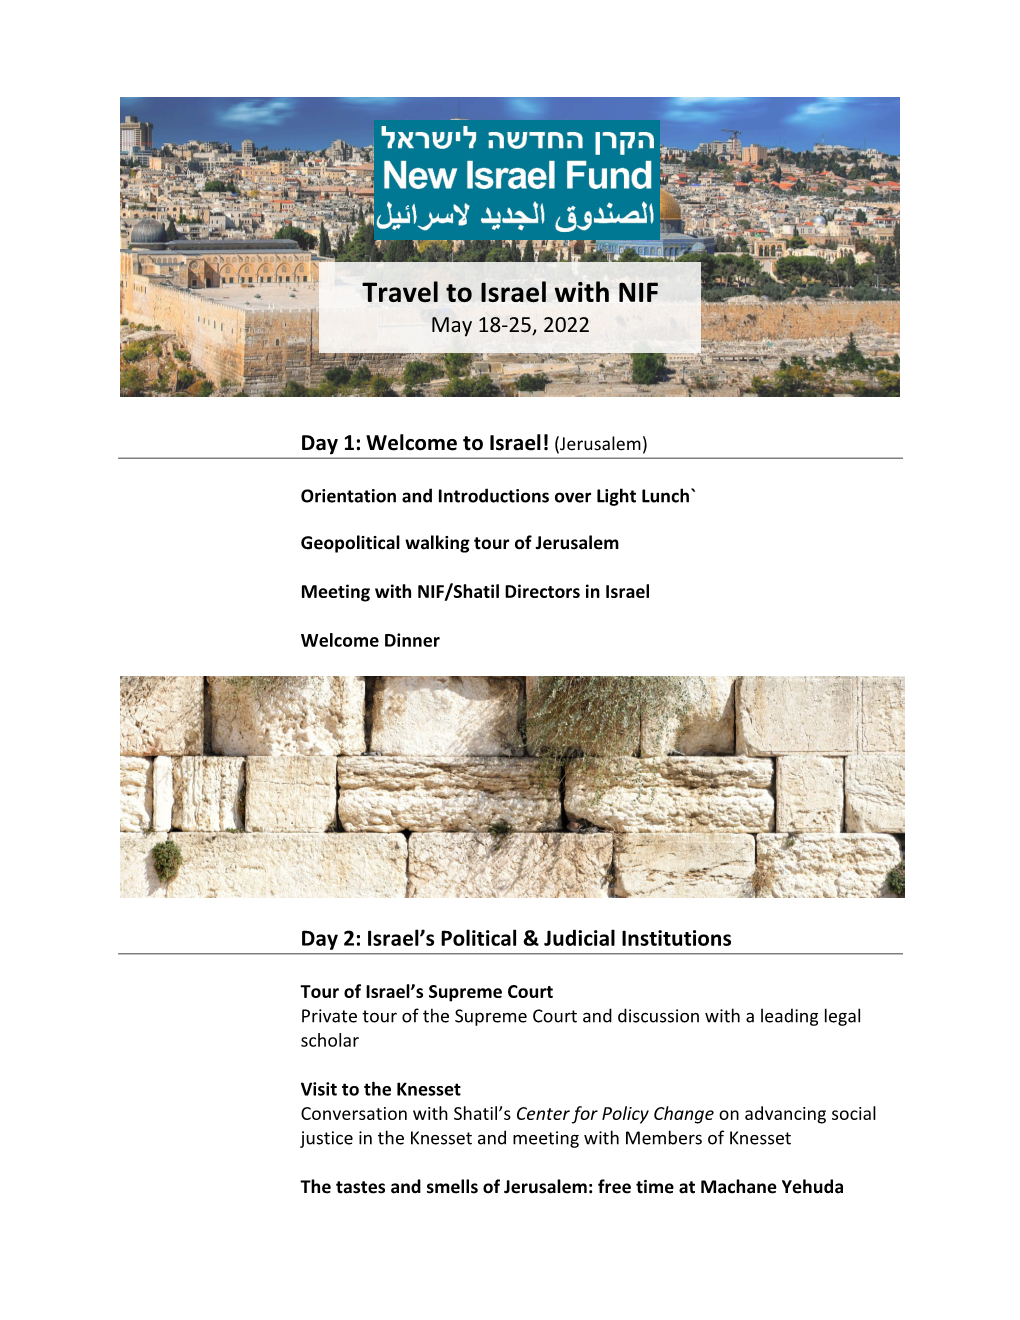 Travel to Israel with NIF May 18-25, 2022